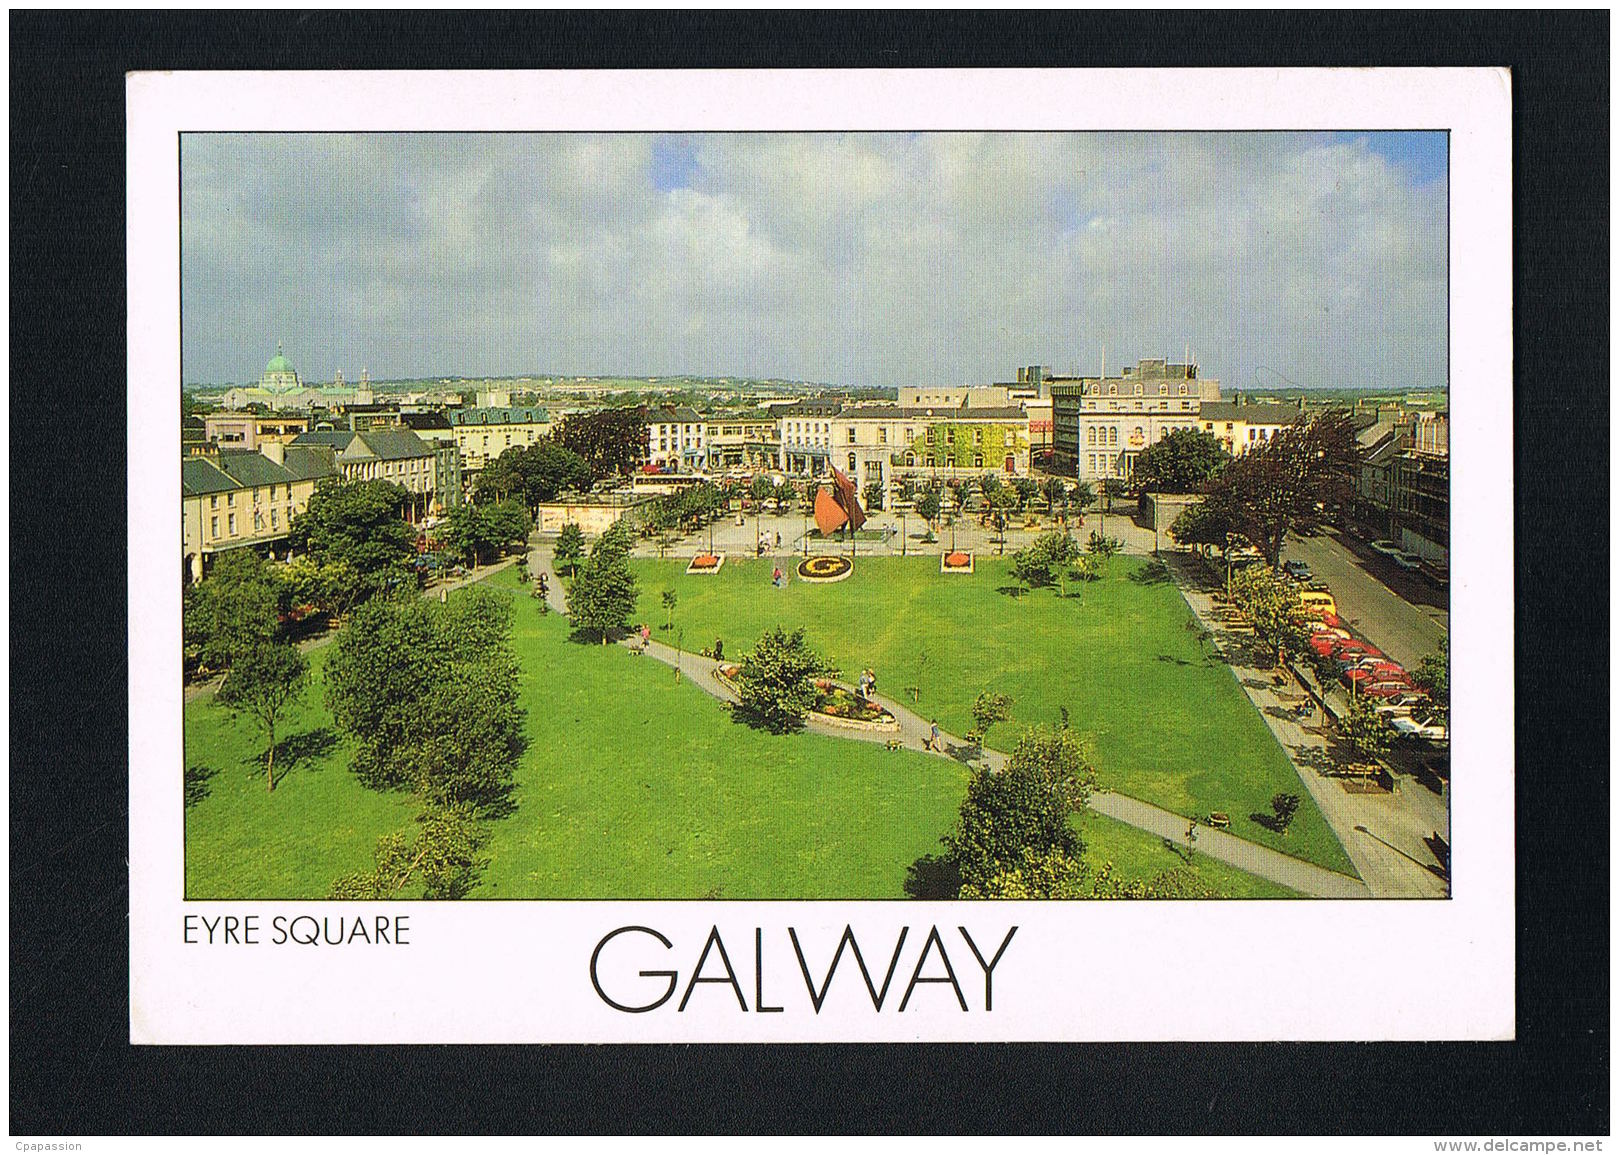 EIRE-IRLANDE-GALWAY - Eyre Square -  - Voyagée Avec Timbre 1990  - Recto Verso- Paypal Free - Galway